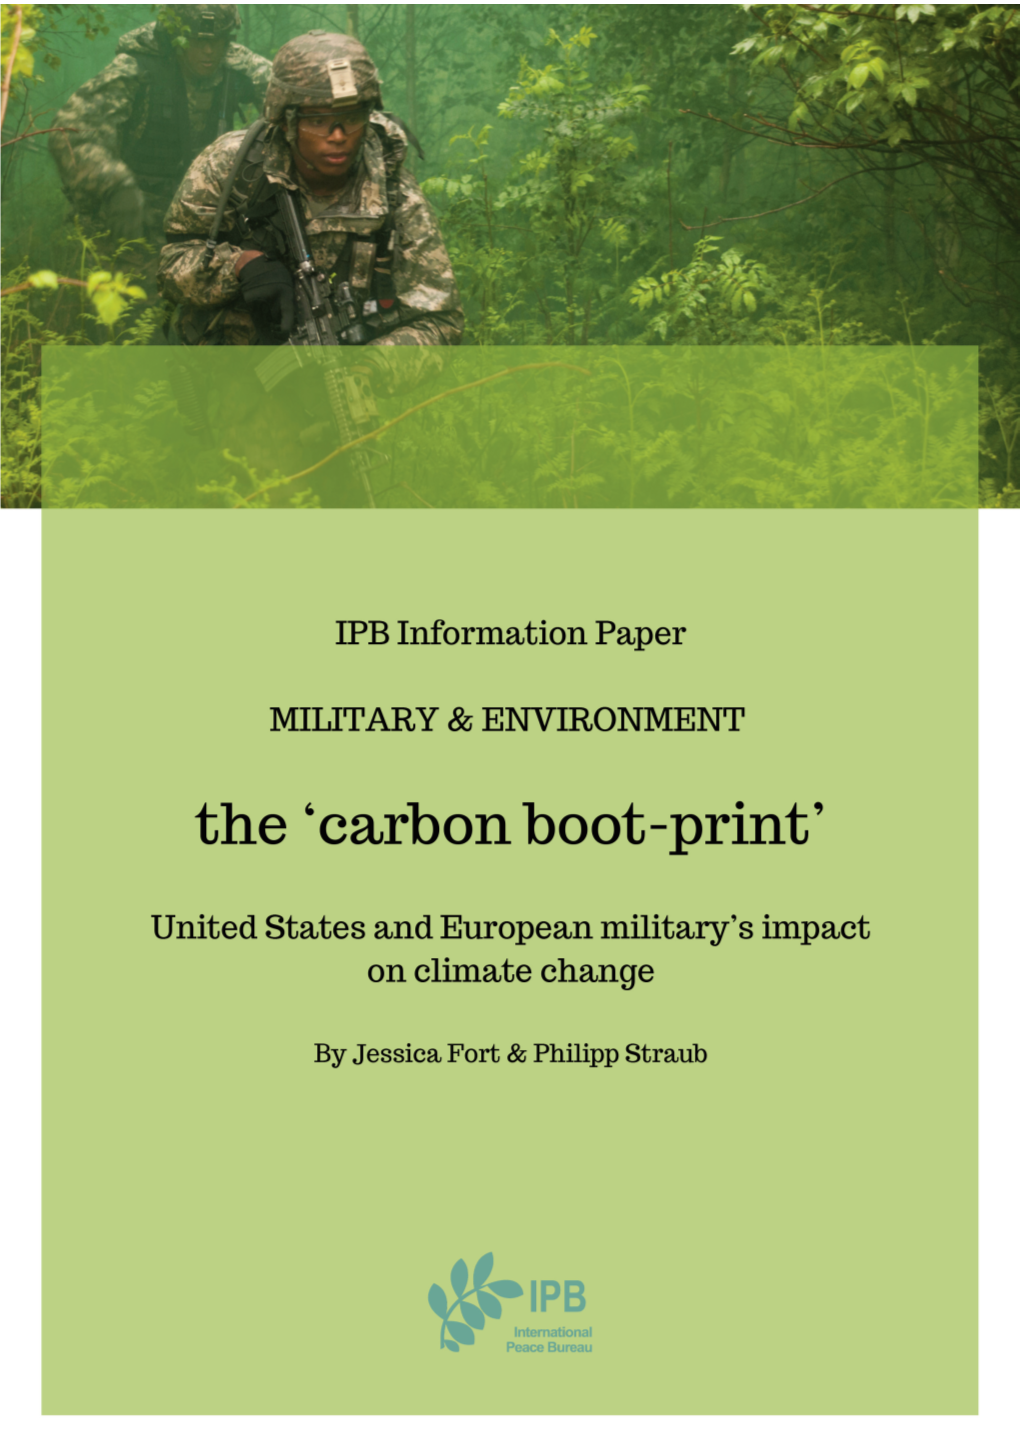 Carbon Bootprints’, Severely Accelerate Climate Change